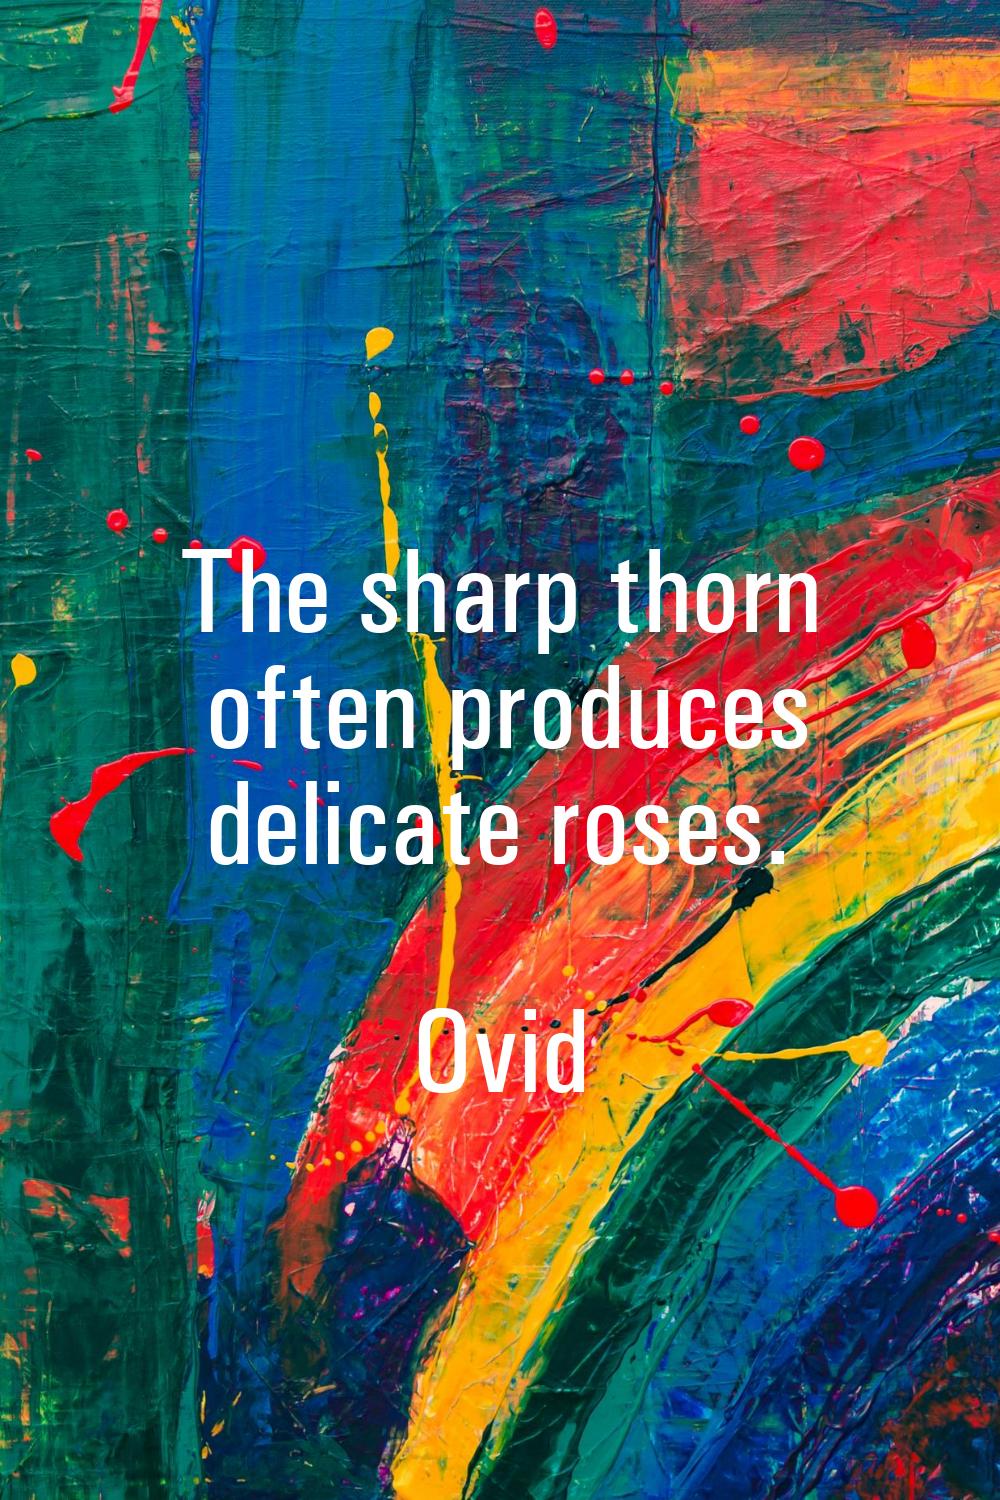 The sharp thorn often produces delicate roses.